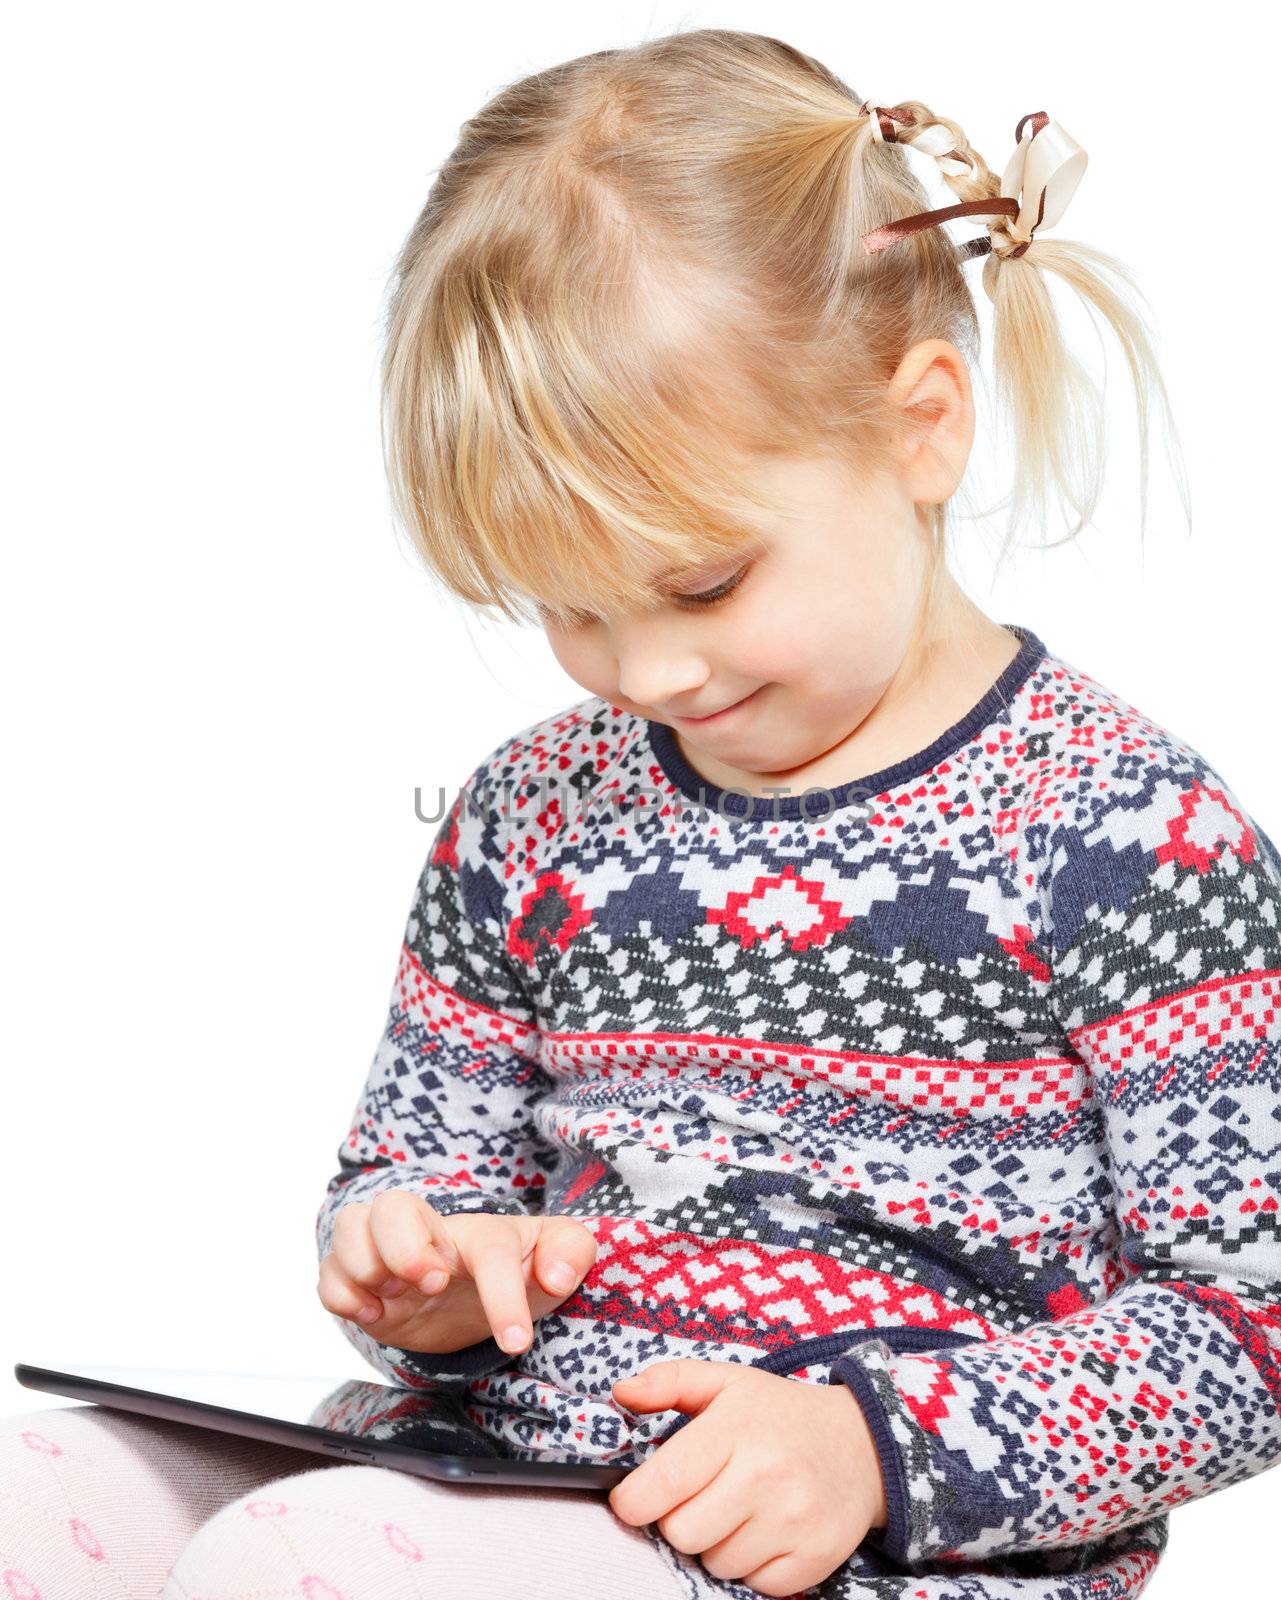 Portrait of 4 years girl using a touch pad